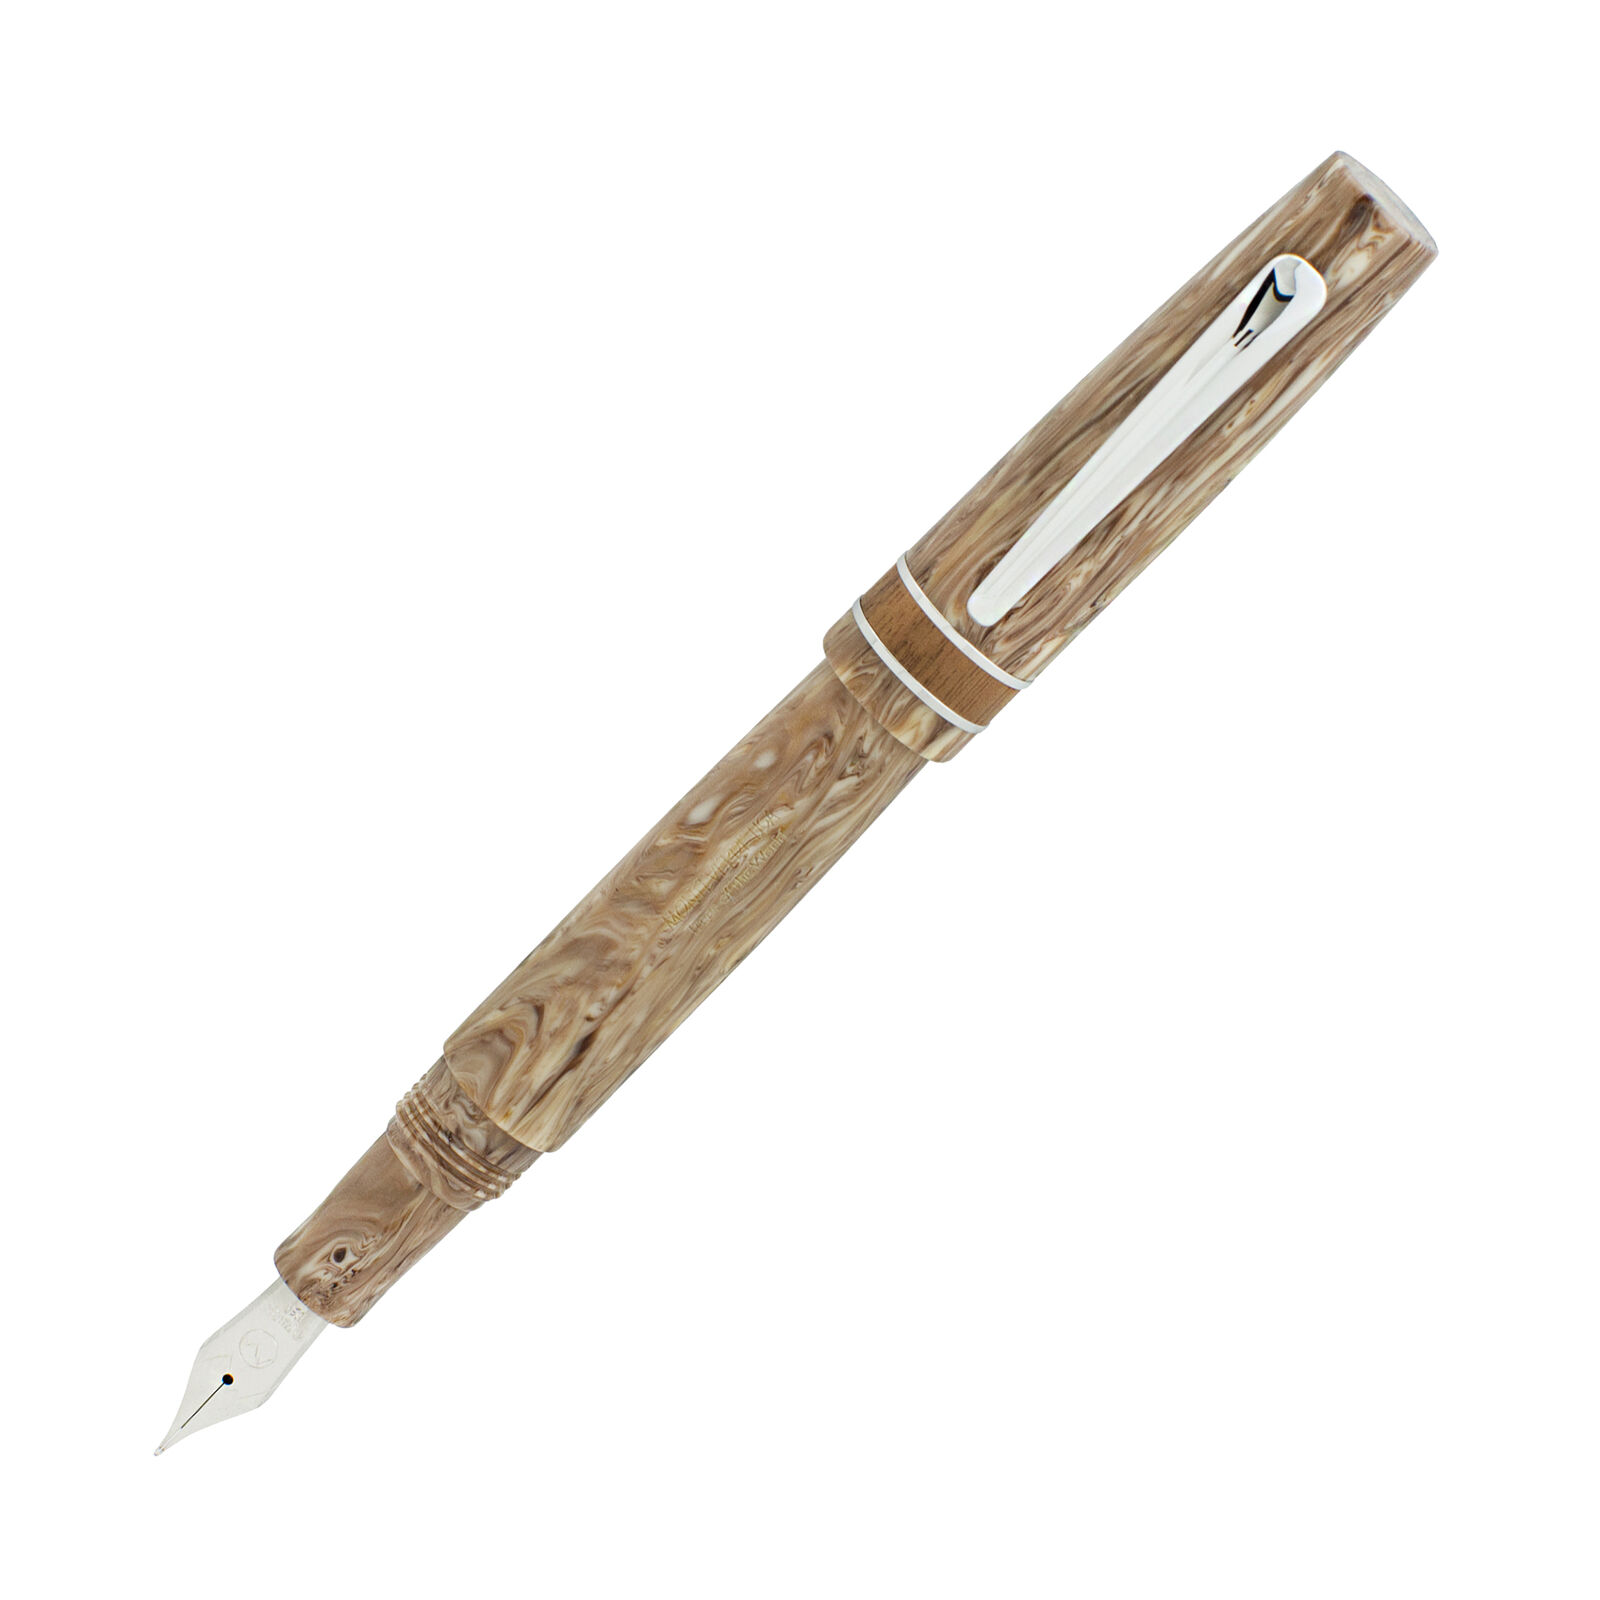 Monteverde Trees of the World Fountain Pen in Avenue of the Baobabs - Medium